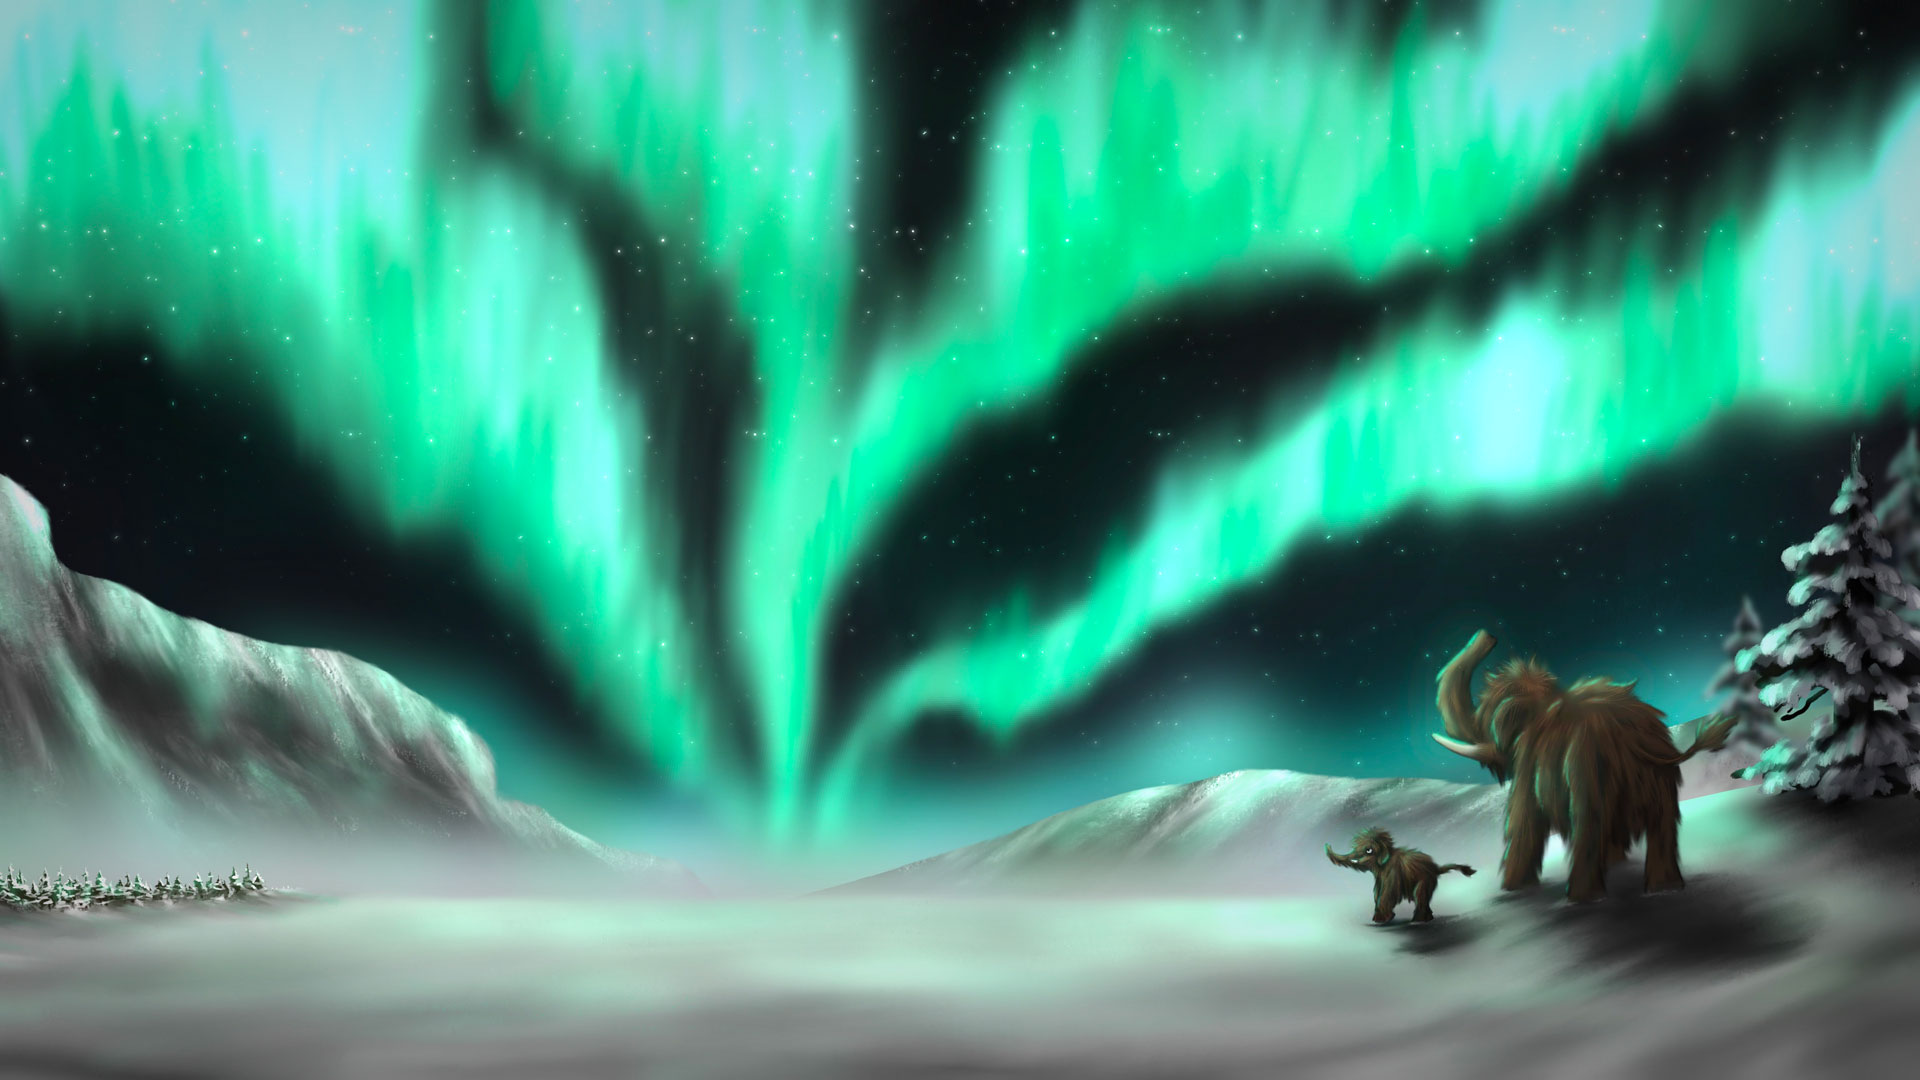 BA Animation scene by Will Lawrence showing Mammoths gazing up at the Northern Lights.